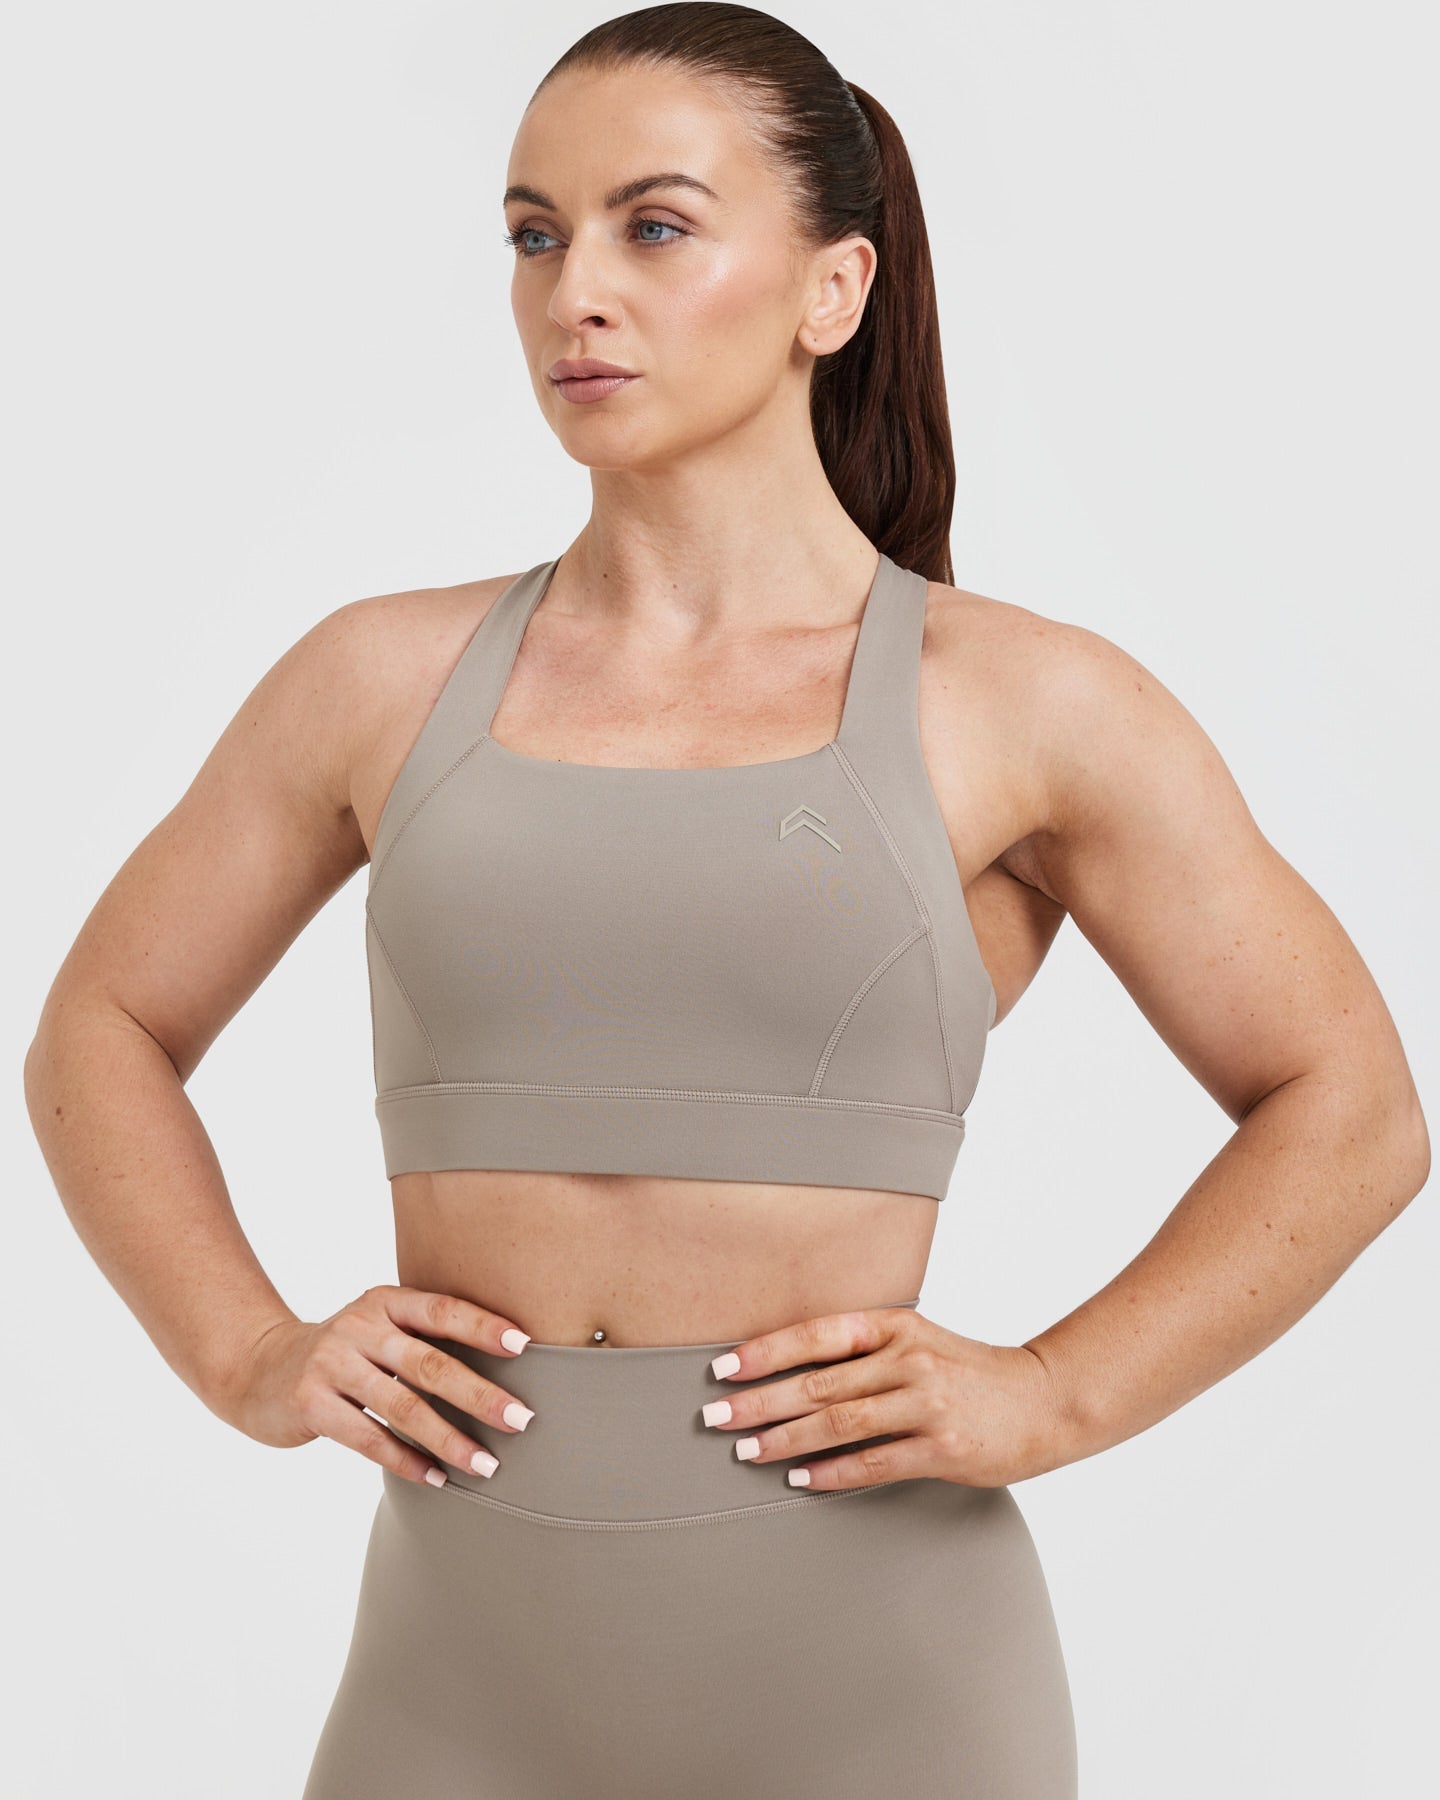 Crocodile Double Strap One Shoulder Sports Bra, High Support - Onyx